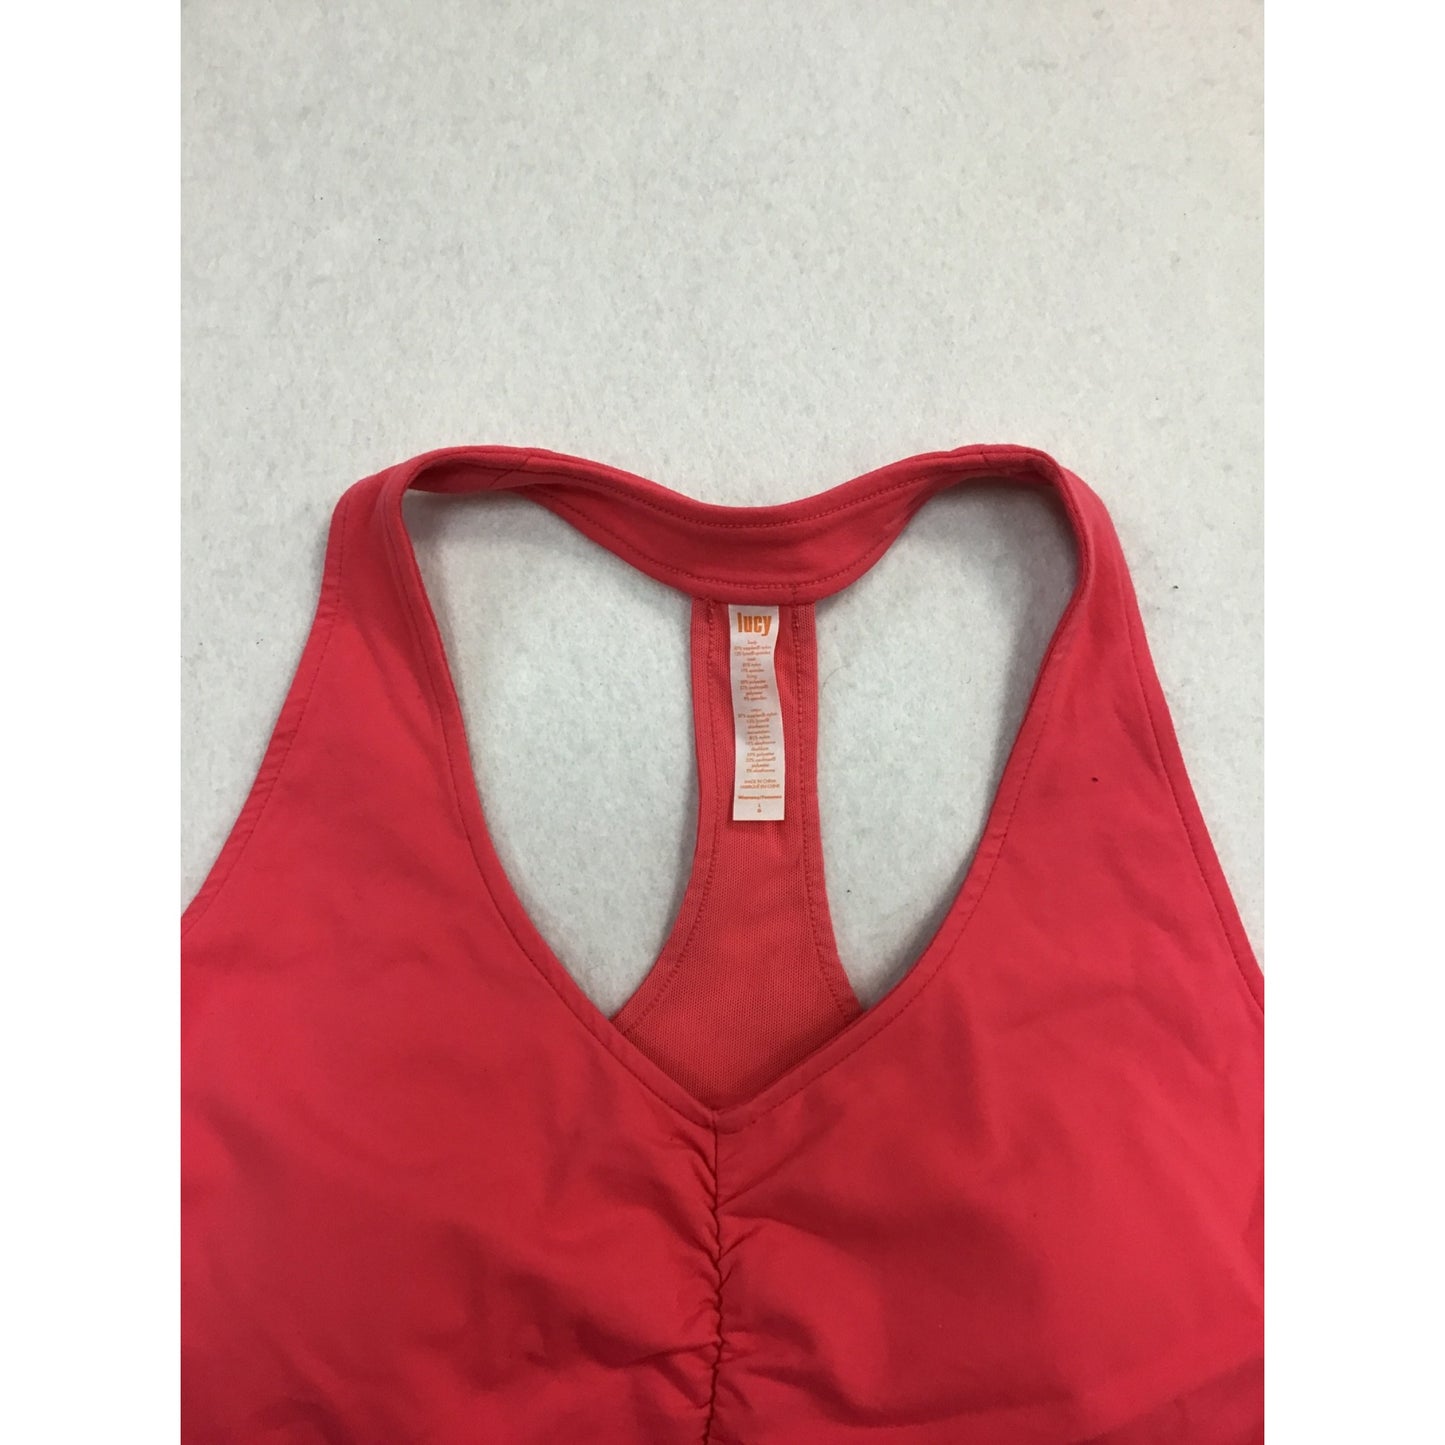 Women’s Compression Athletic Tank-Top